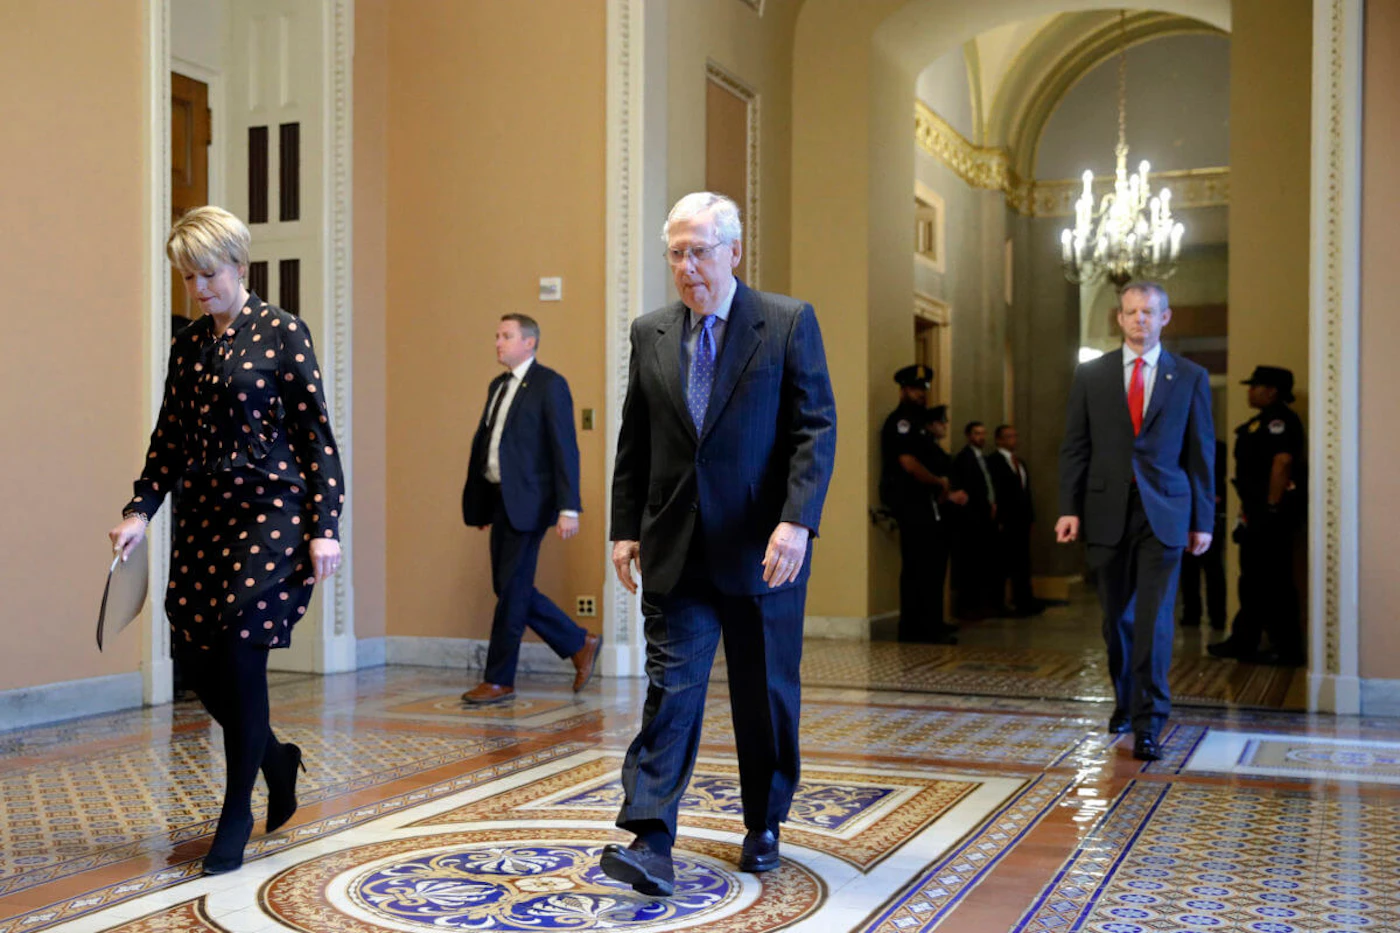 Senate Majority Leader Mitch McConnell of Ky. walks to the Senate chamber on Capitol Hill in Washington, Tuesday, March 24, 2020. (AP Photo/Patrick Semansky)